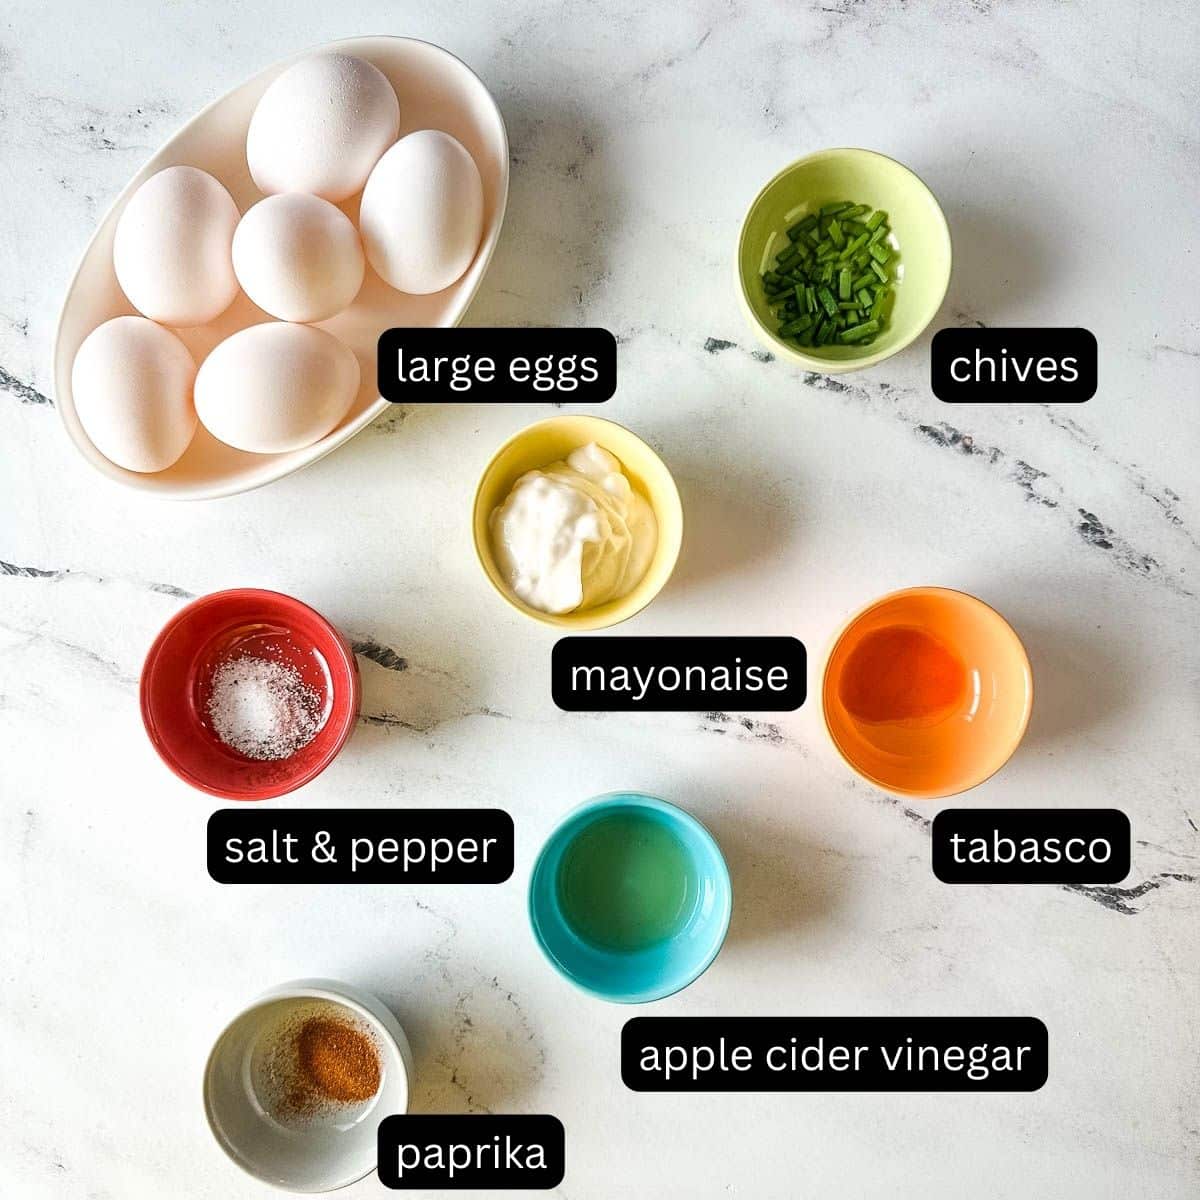 Labeled ingredients for deviled eggs without mustard.